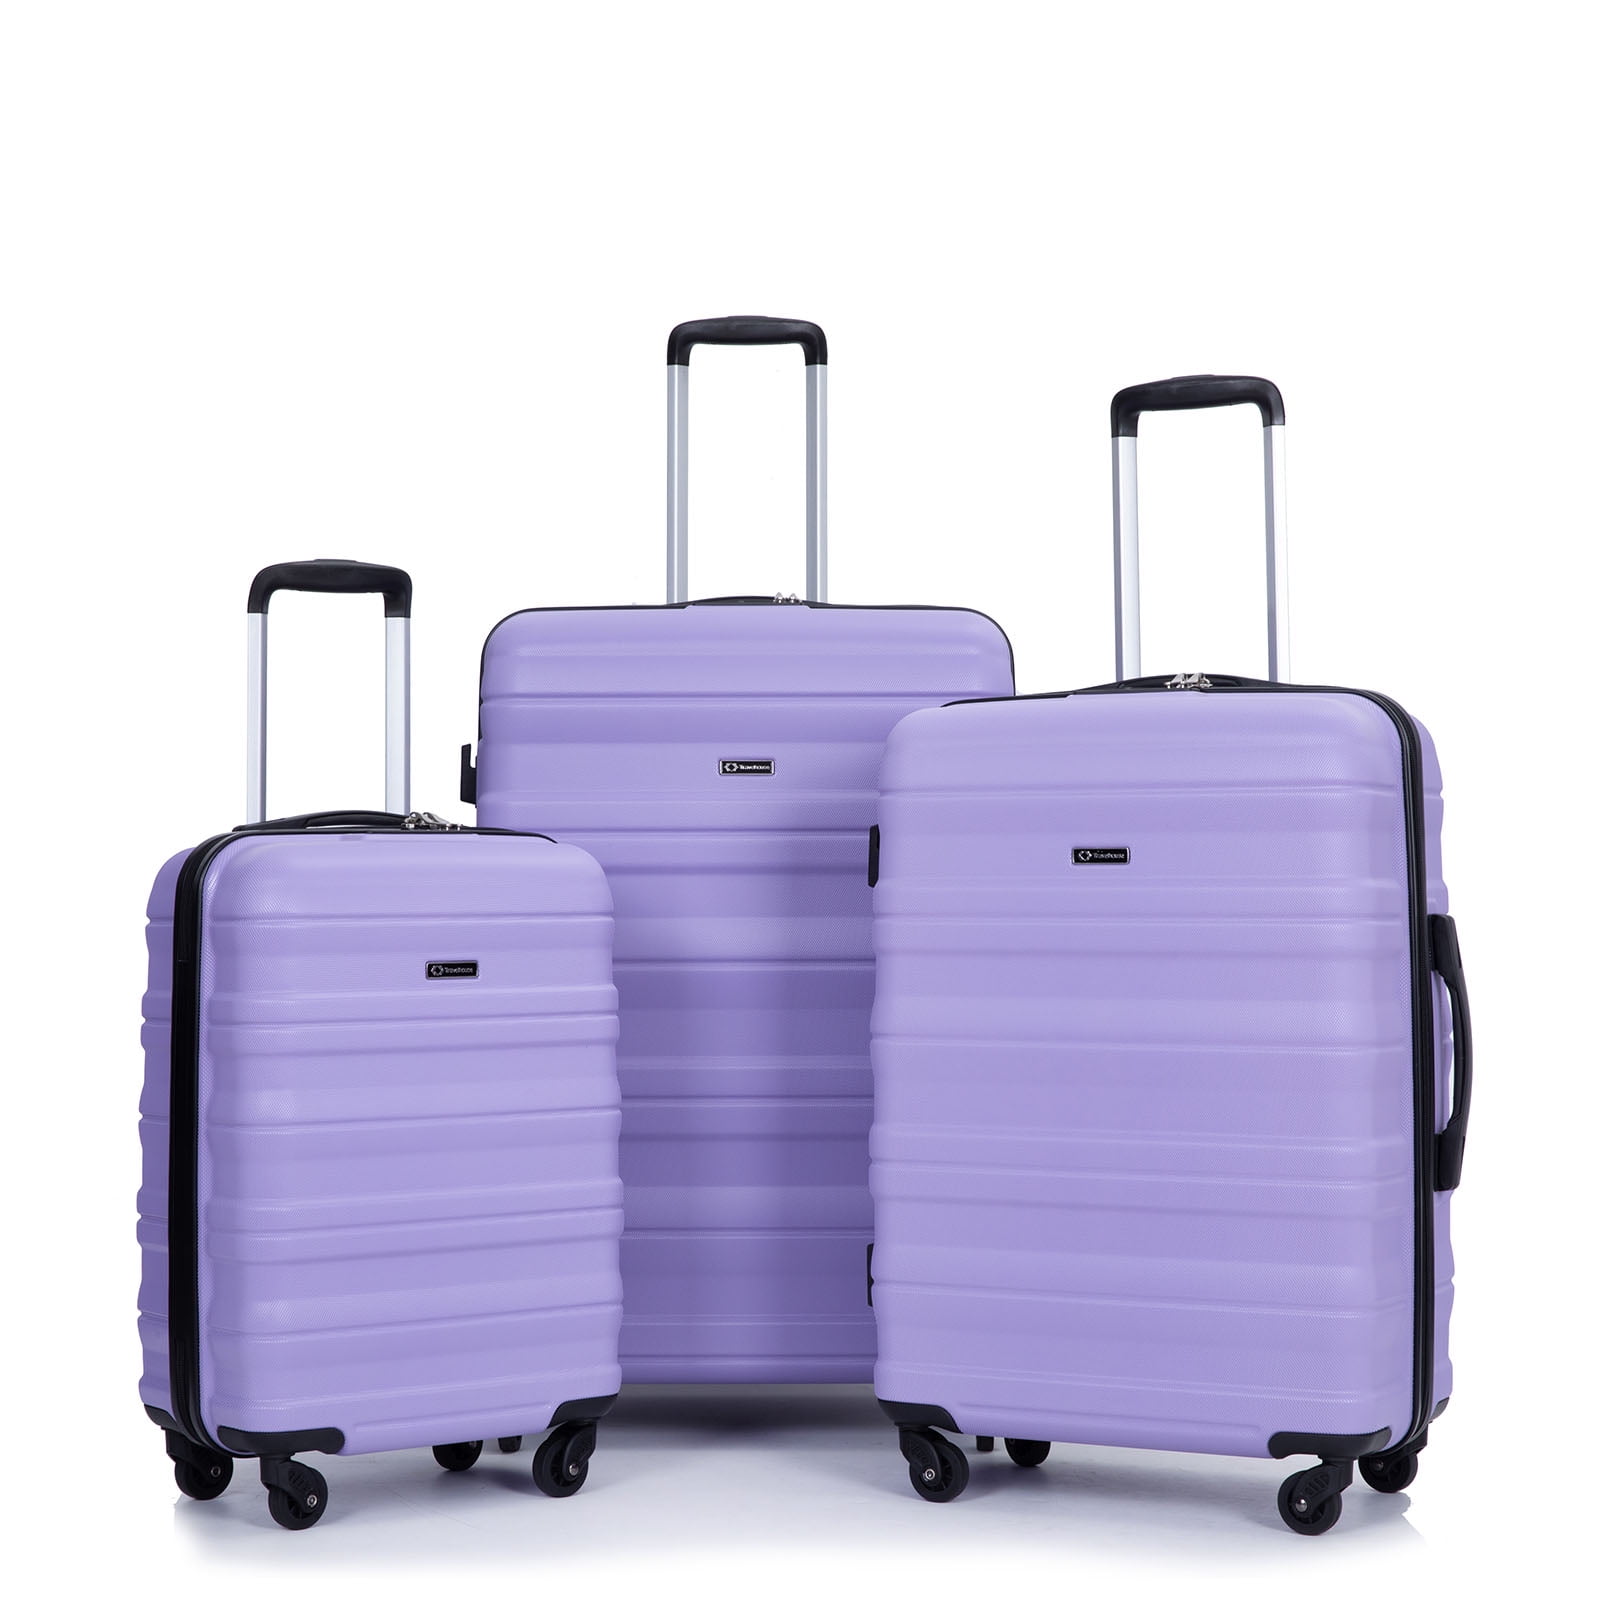 Protege 3 Piece Luggage Travel Set Including Suitcase, Duffel Bag, and Boarding Tote - Purple (Walmart Exclusive), Size: Luggage Set